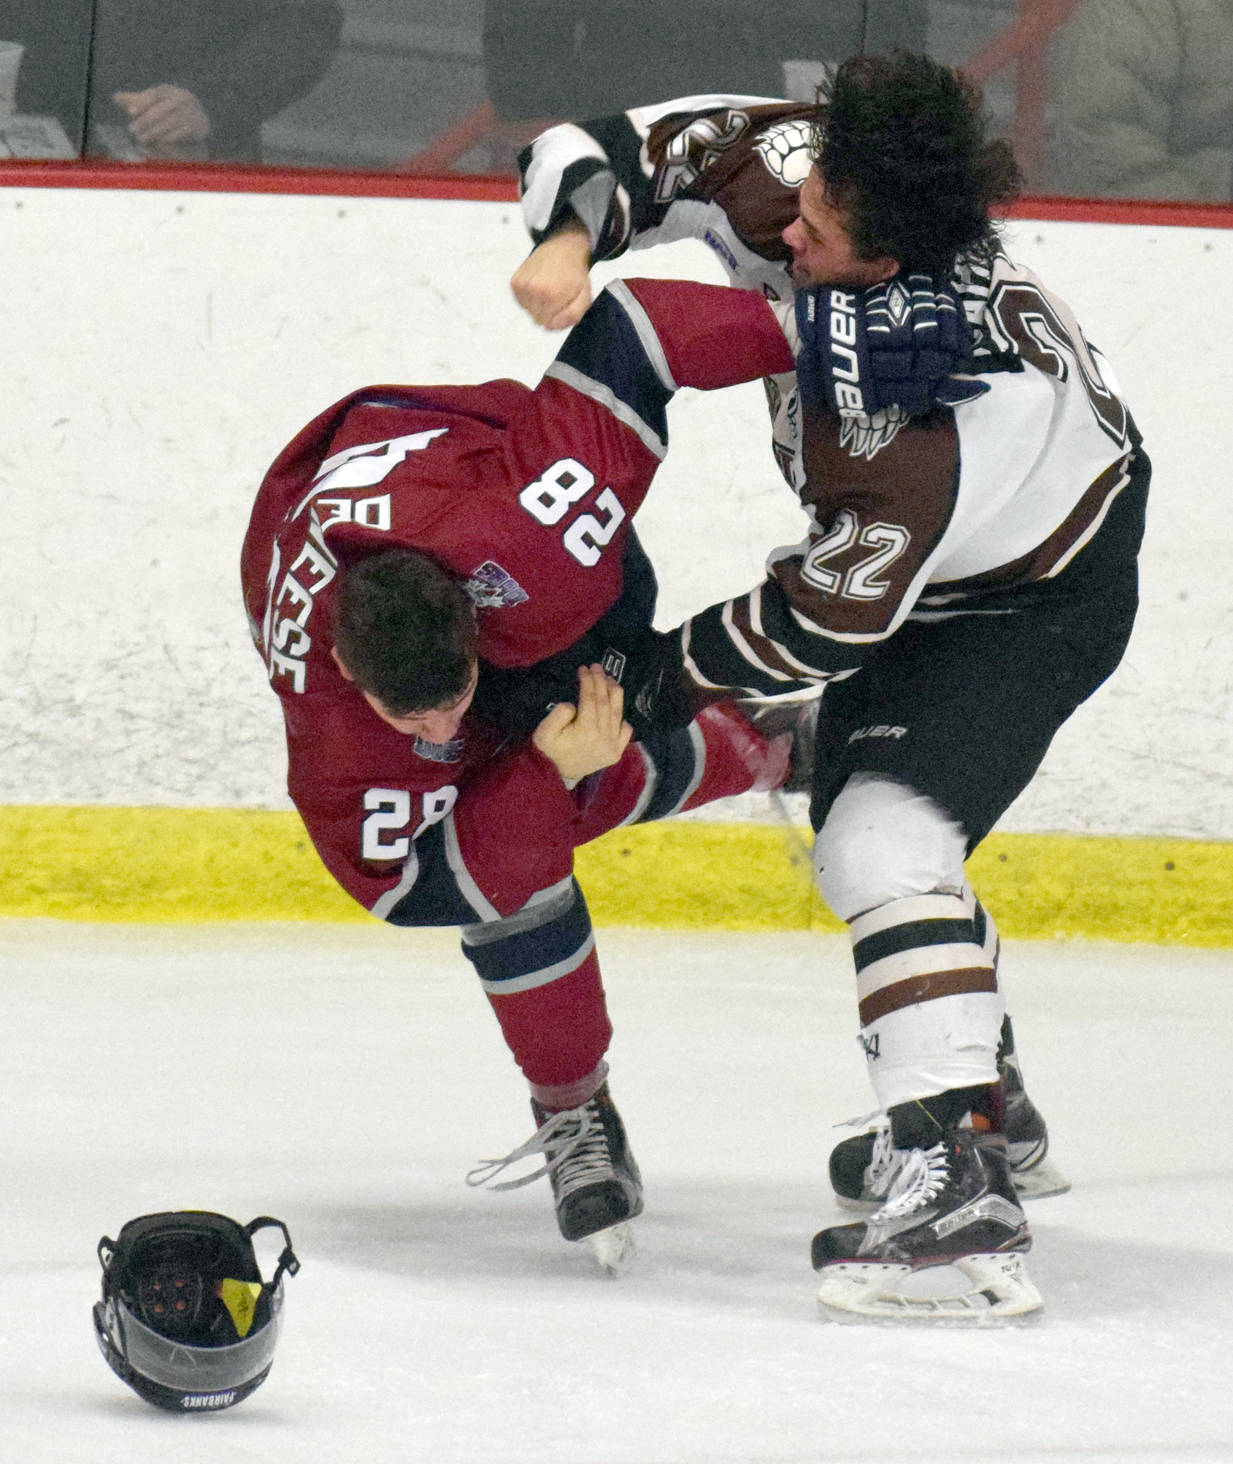 Kenai River Brown Bears defenseman Connor Scahill gets the better of Fairbanks Ice Dogs forward Tyler Deweese in a fight Friday, Nov. 24, 2017, at the Soldotna Regional Sports Complex. (Photo by Jeff Helminiak/Peninsula Clarion)